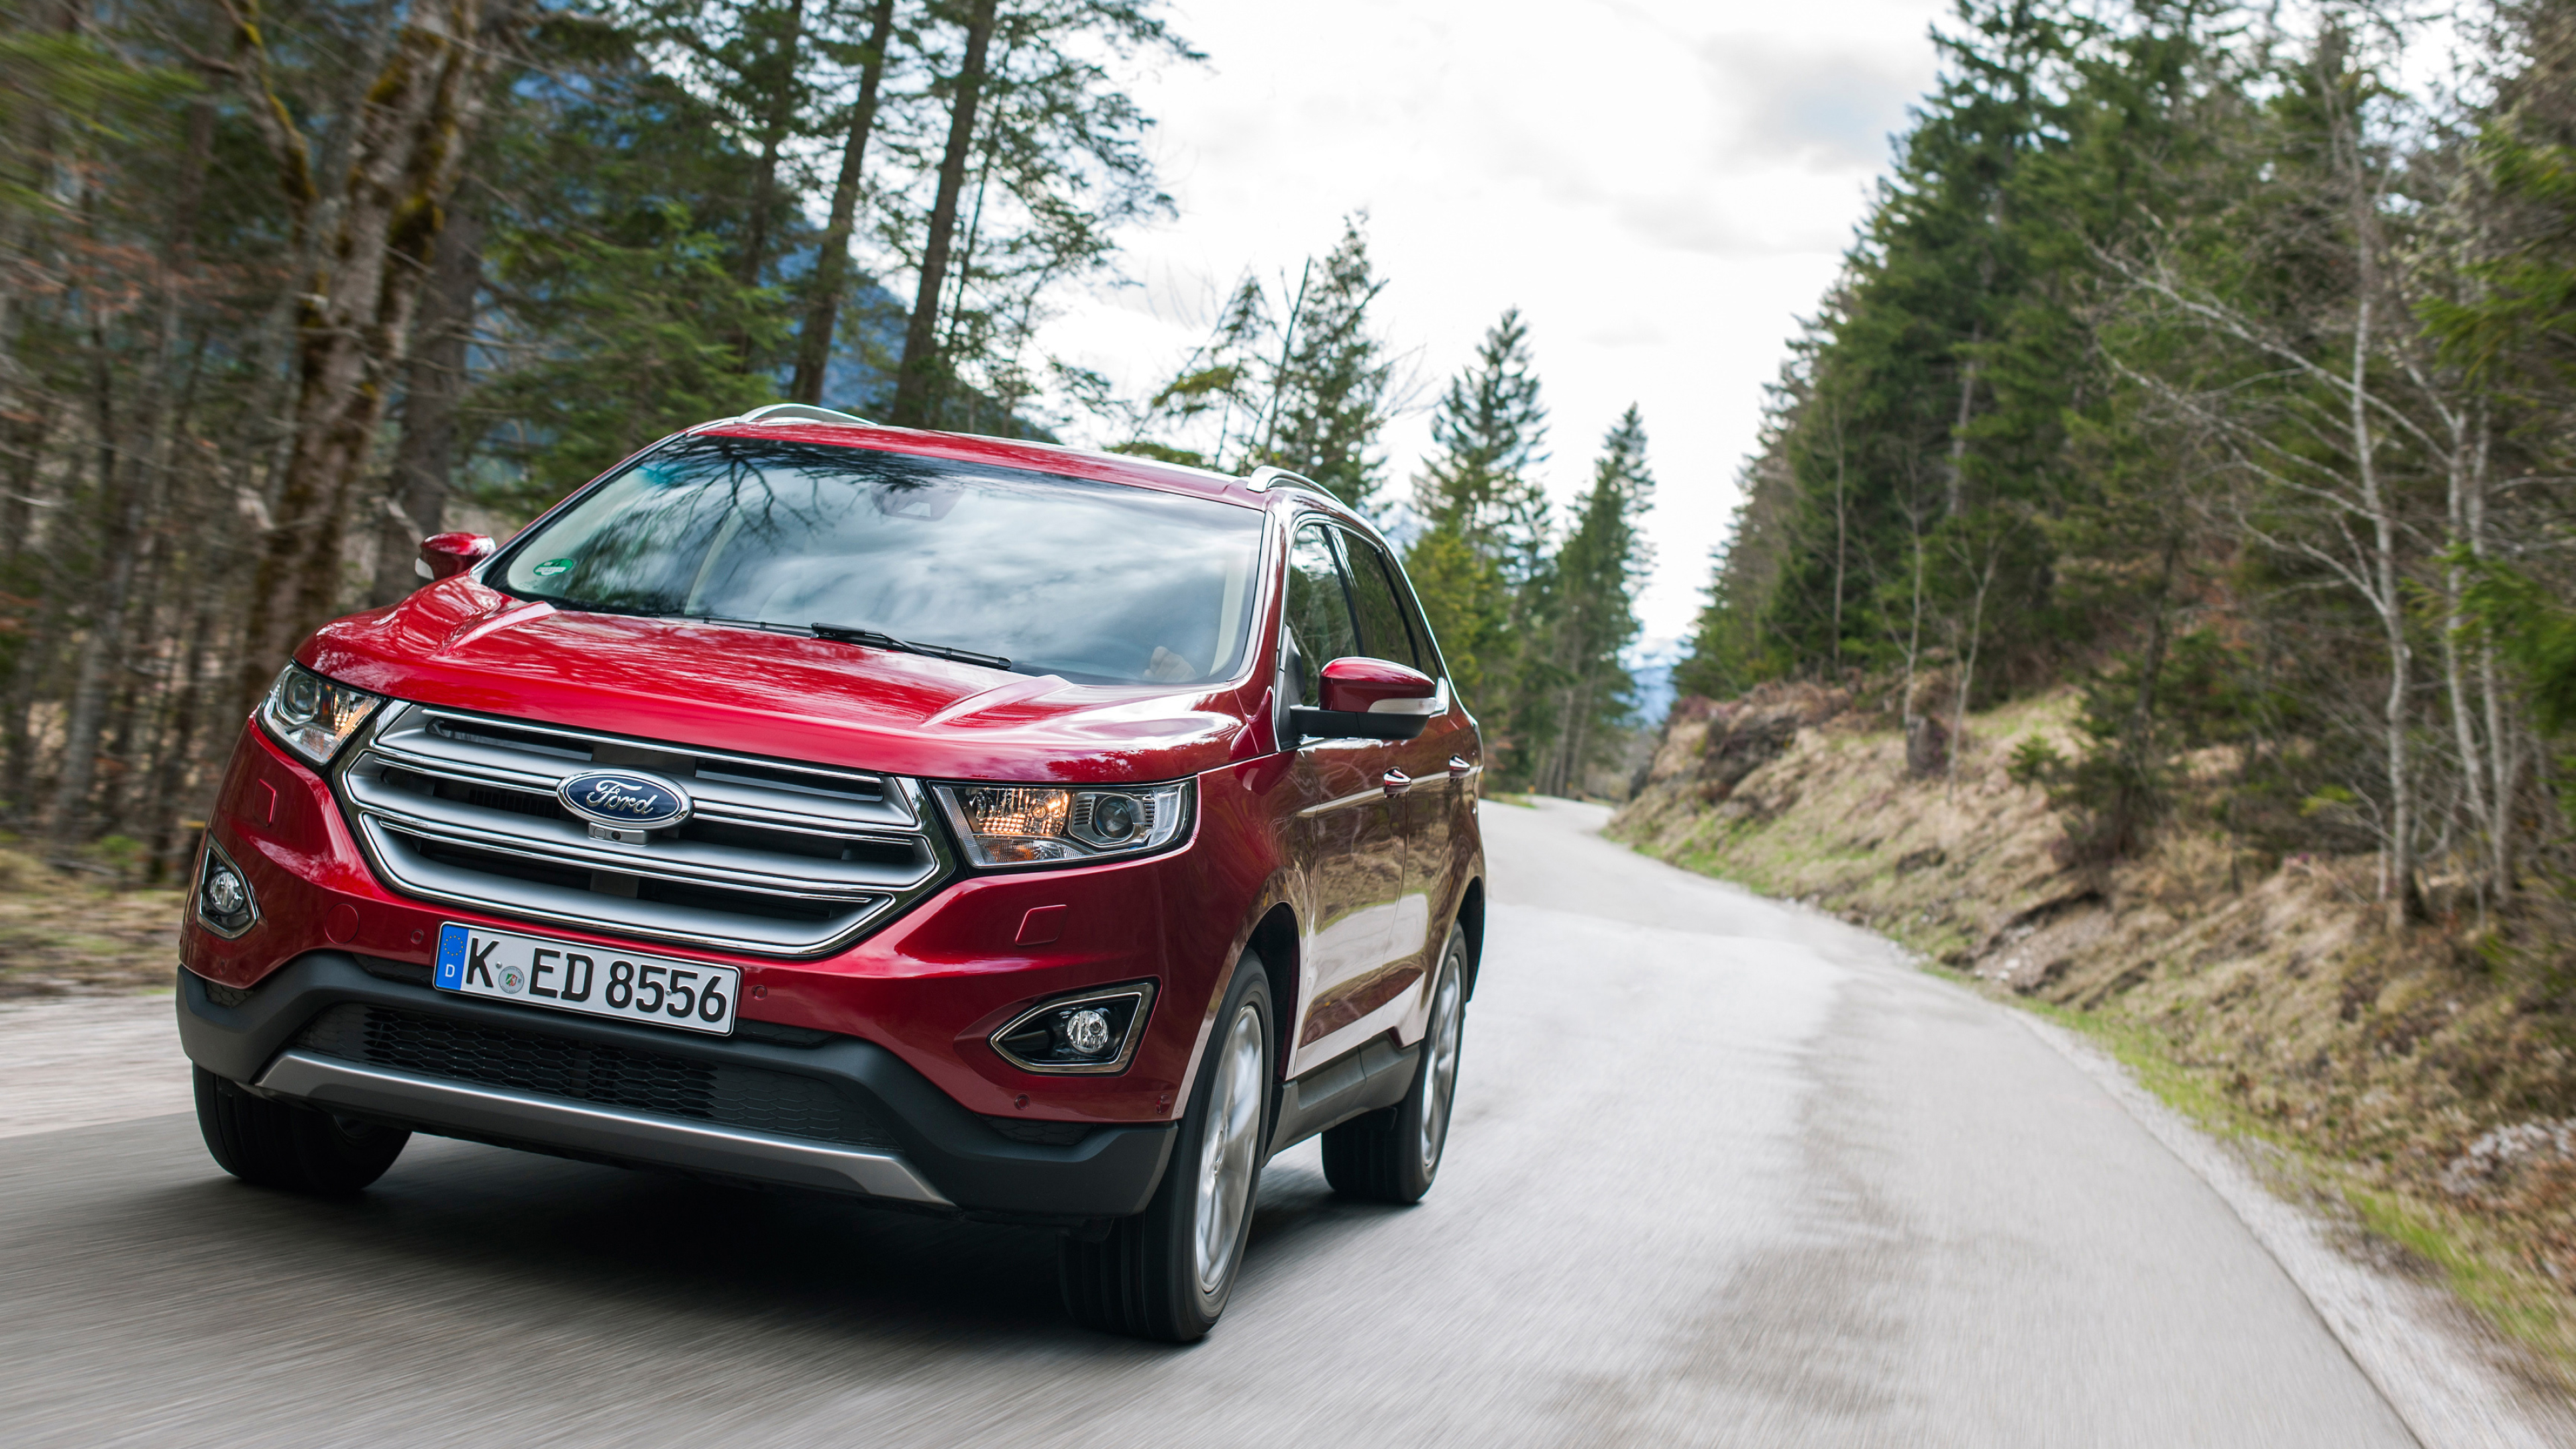 Ford Edge, Dynamic and sporty, Versatile cargo space, Advanced safety systems, 3840x2160 4K Desktop